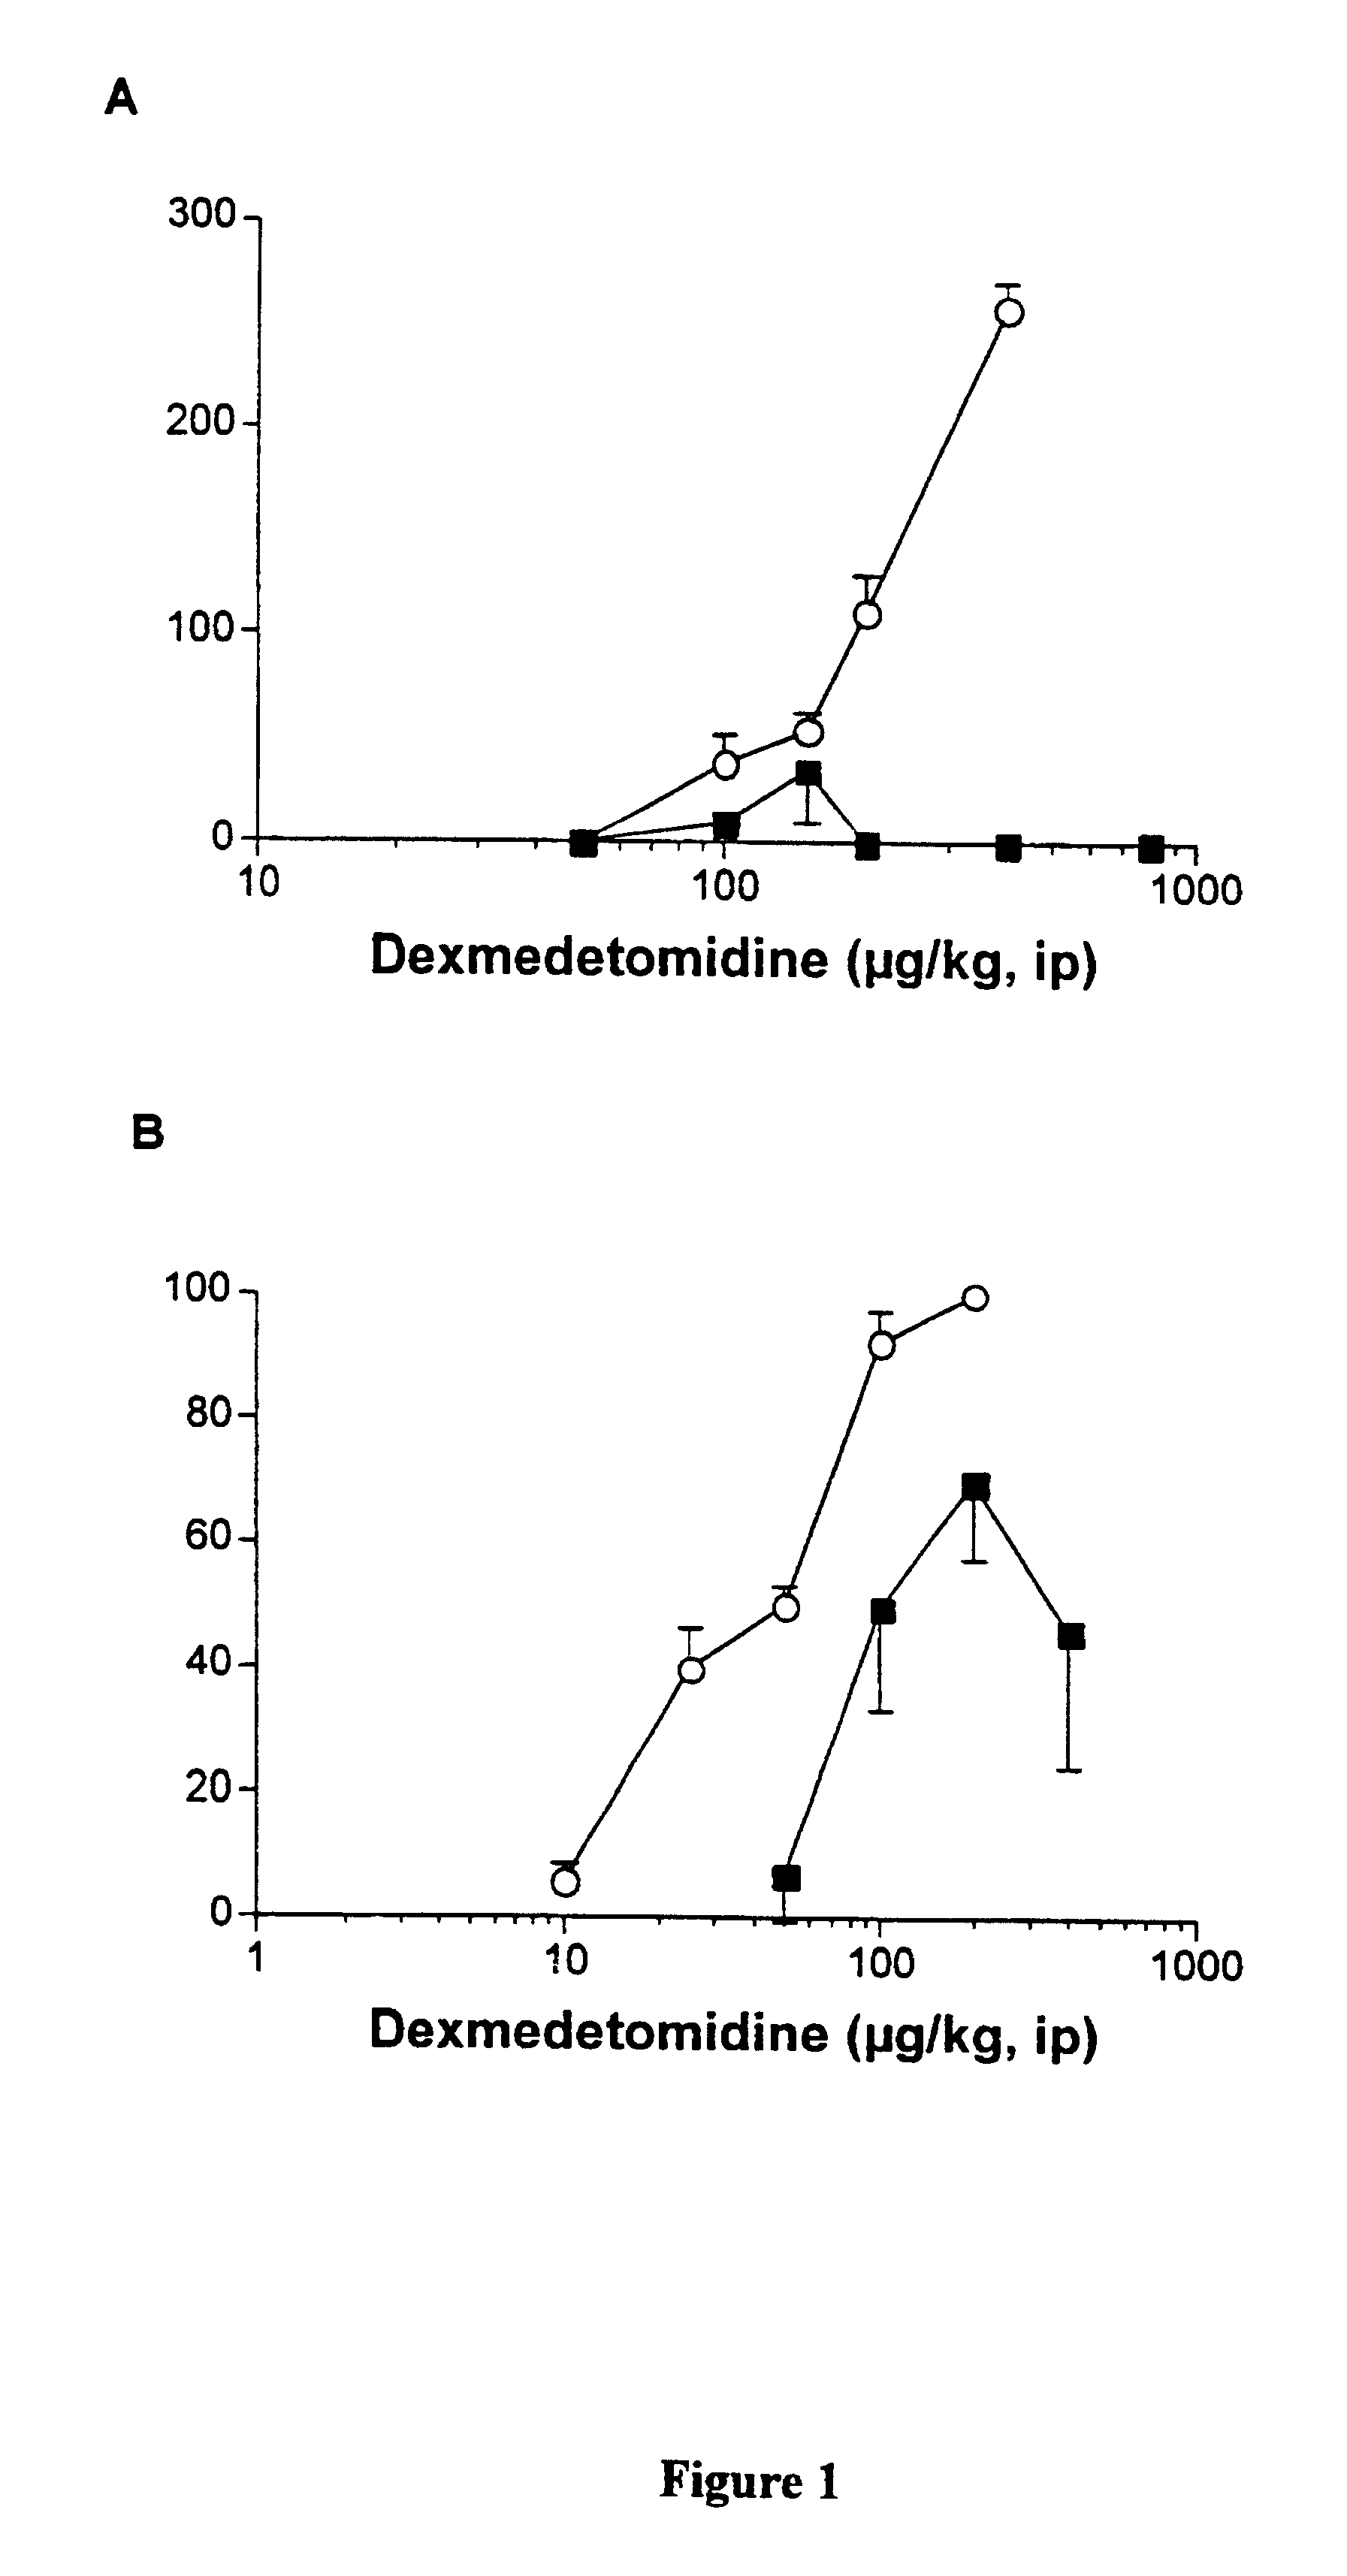 Anaesthetic formulation comprising an NMDA-antagoinst and an alpha-2 adrenergic agonist